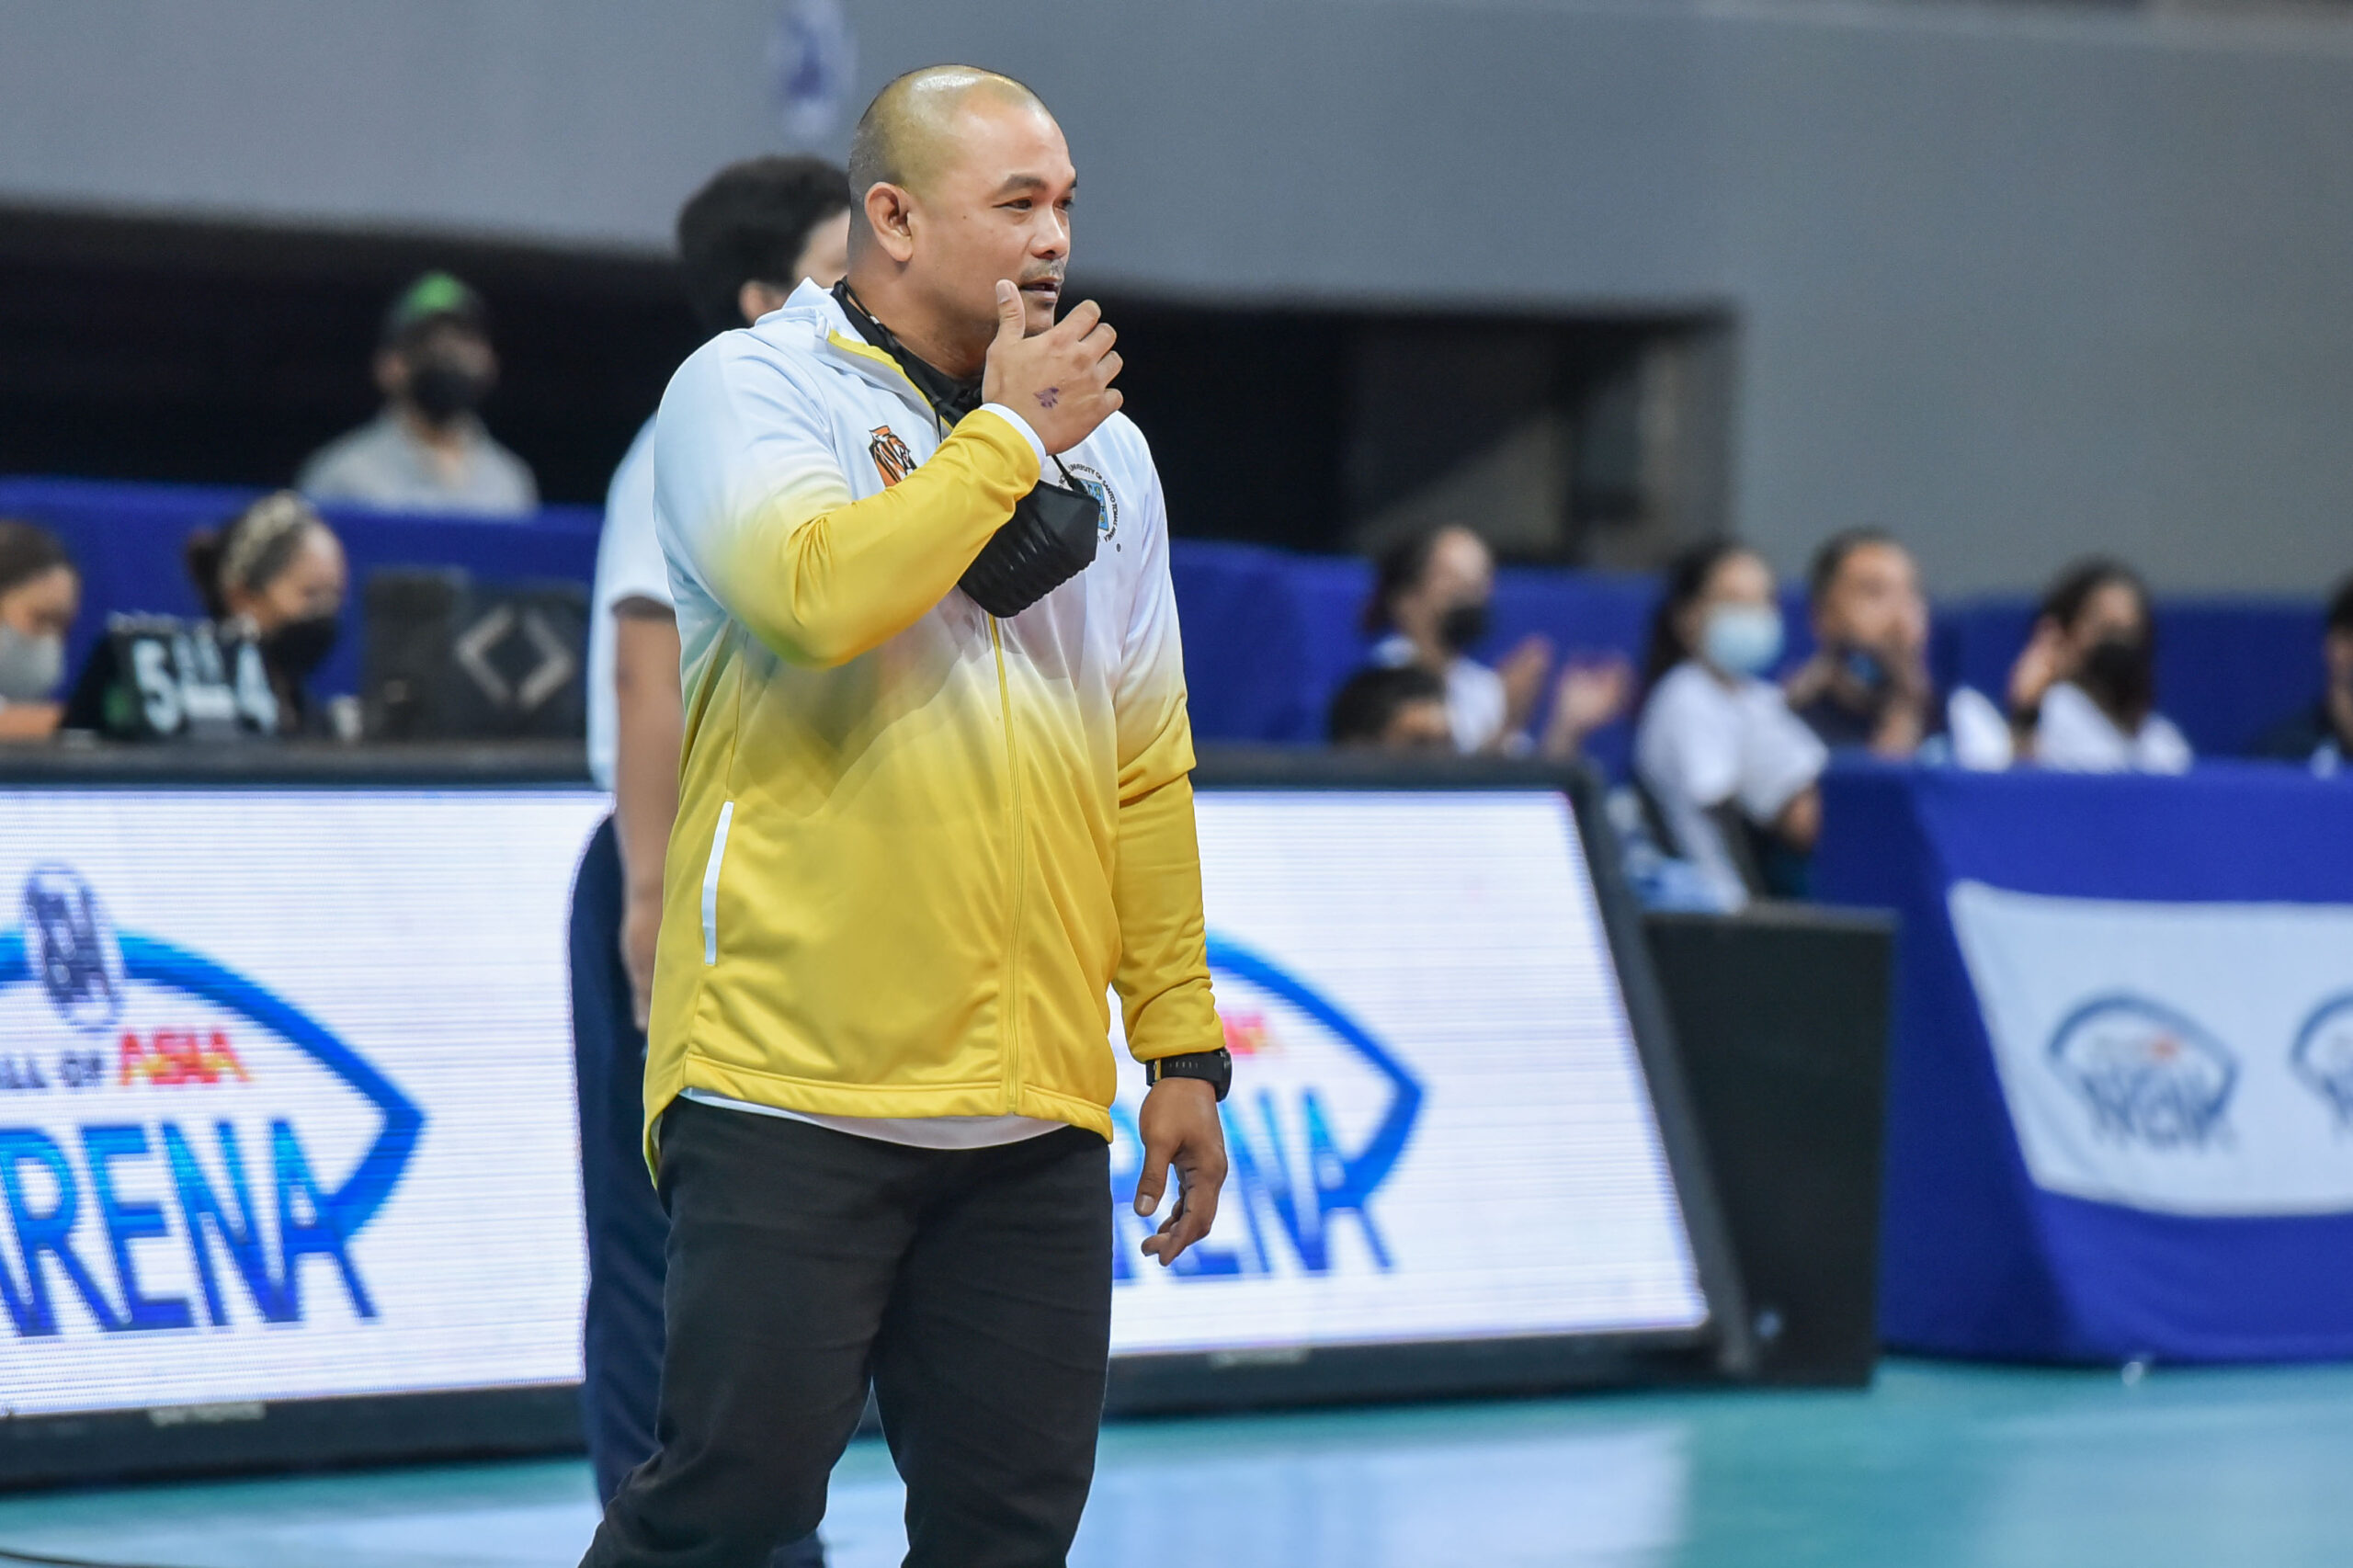 UAAP-84-WVB-UST-vs.-ADU-Kungfu-Reyes-4920-scaled Cardiac five-setters will only help UST in the long run, says Kungfu Reyes News UAAP UST Volleyball  - philippine sports news